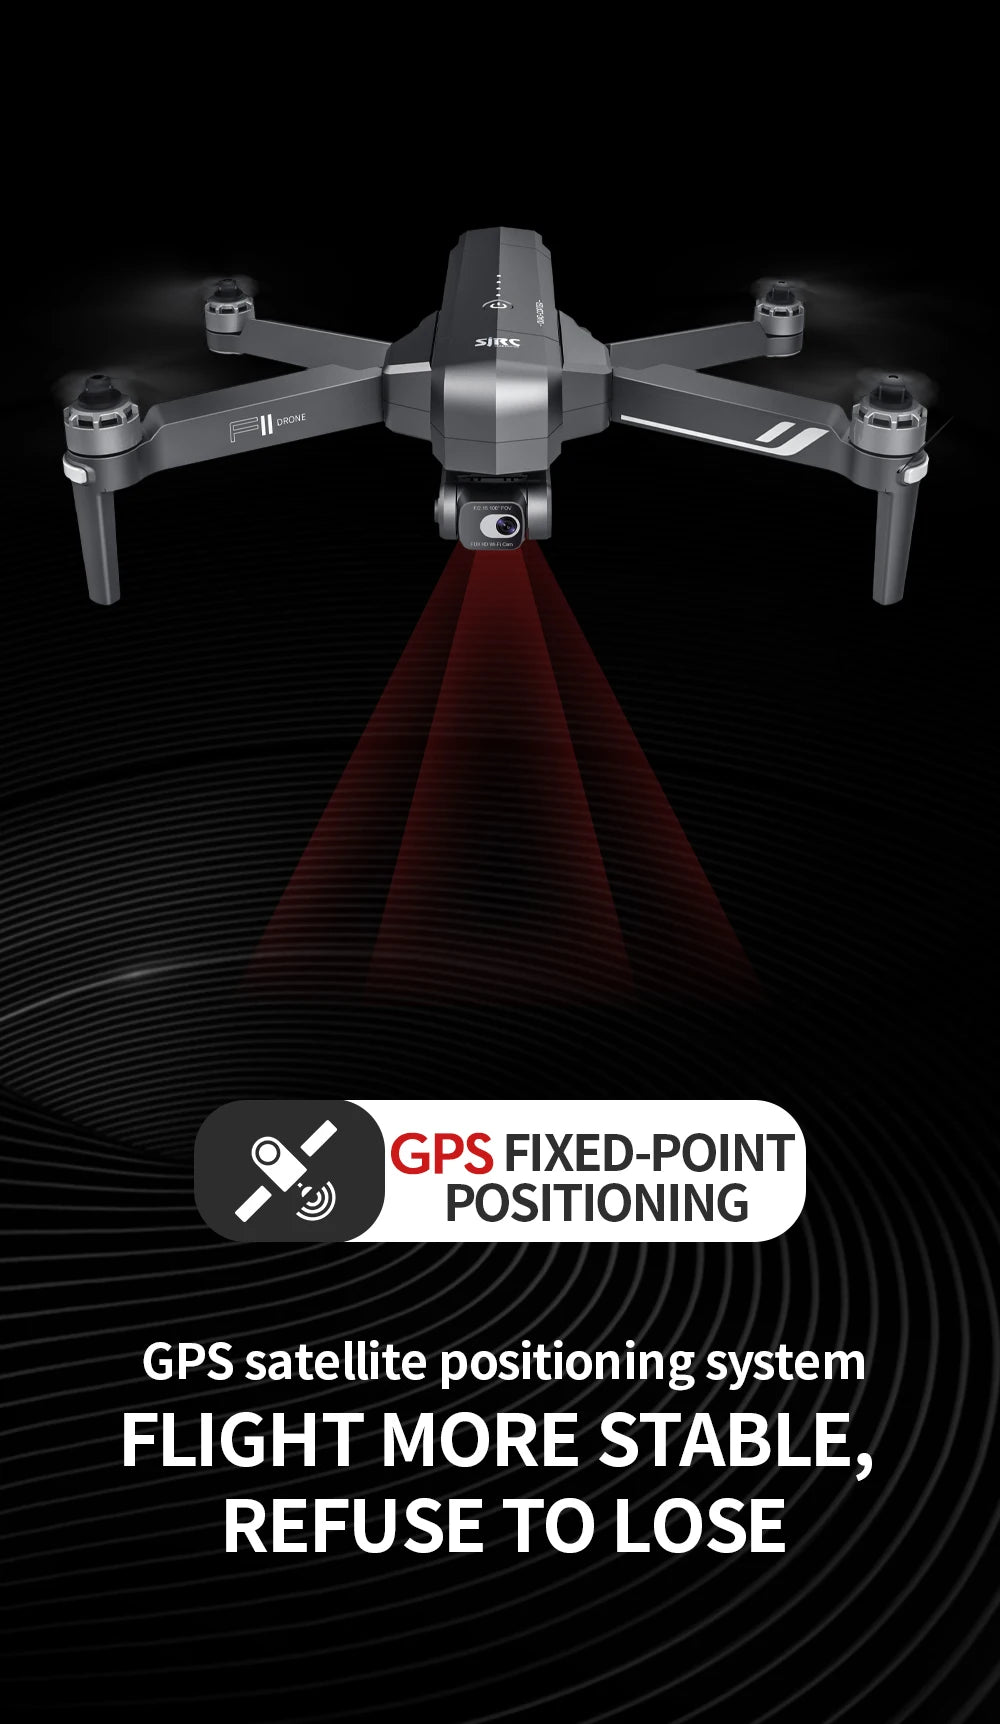 F11S PRO Drone, Sic GPS FIXED-POINT POSITIONING GPS satellite positioning system